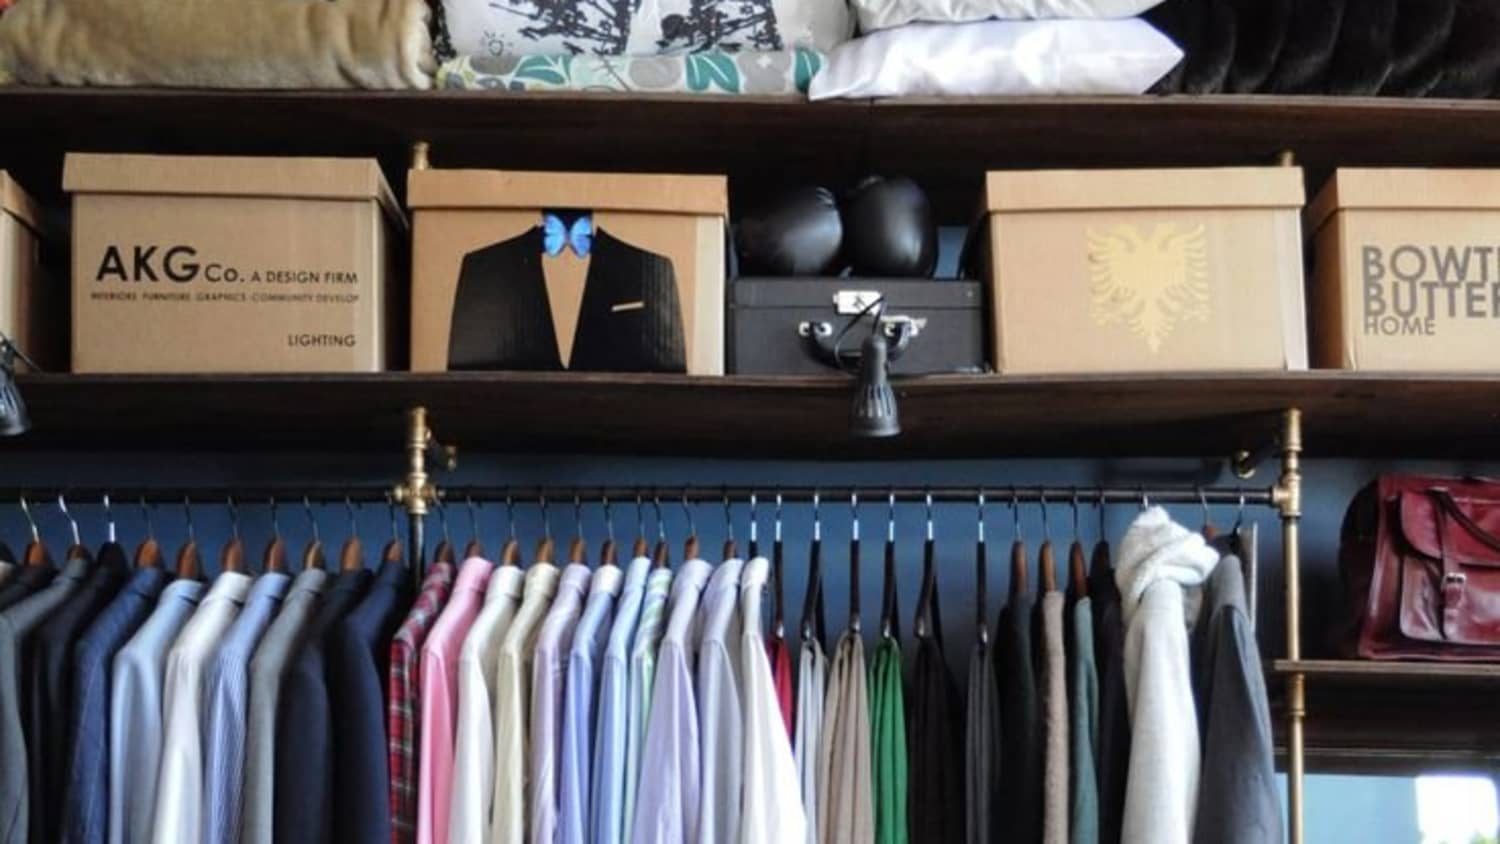 How to Organize Clothing Inventory